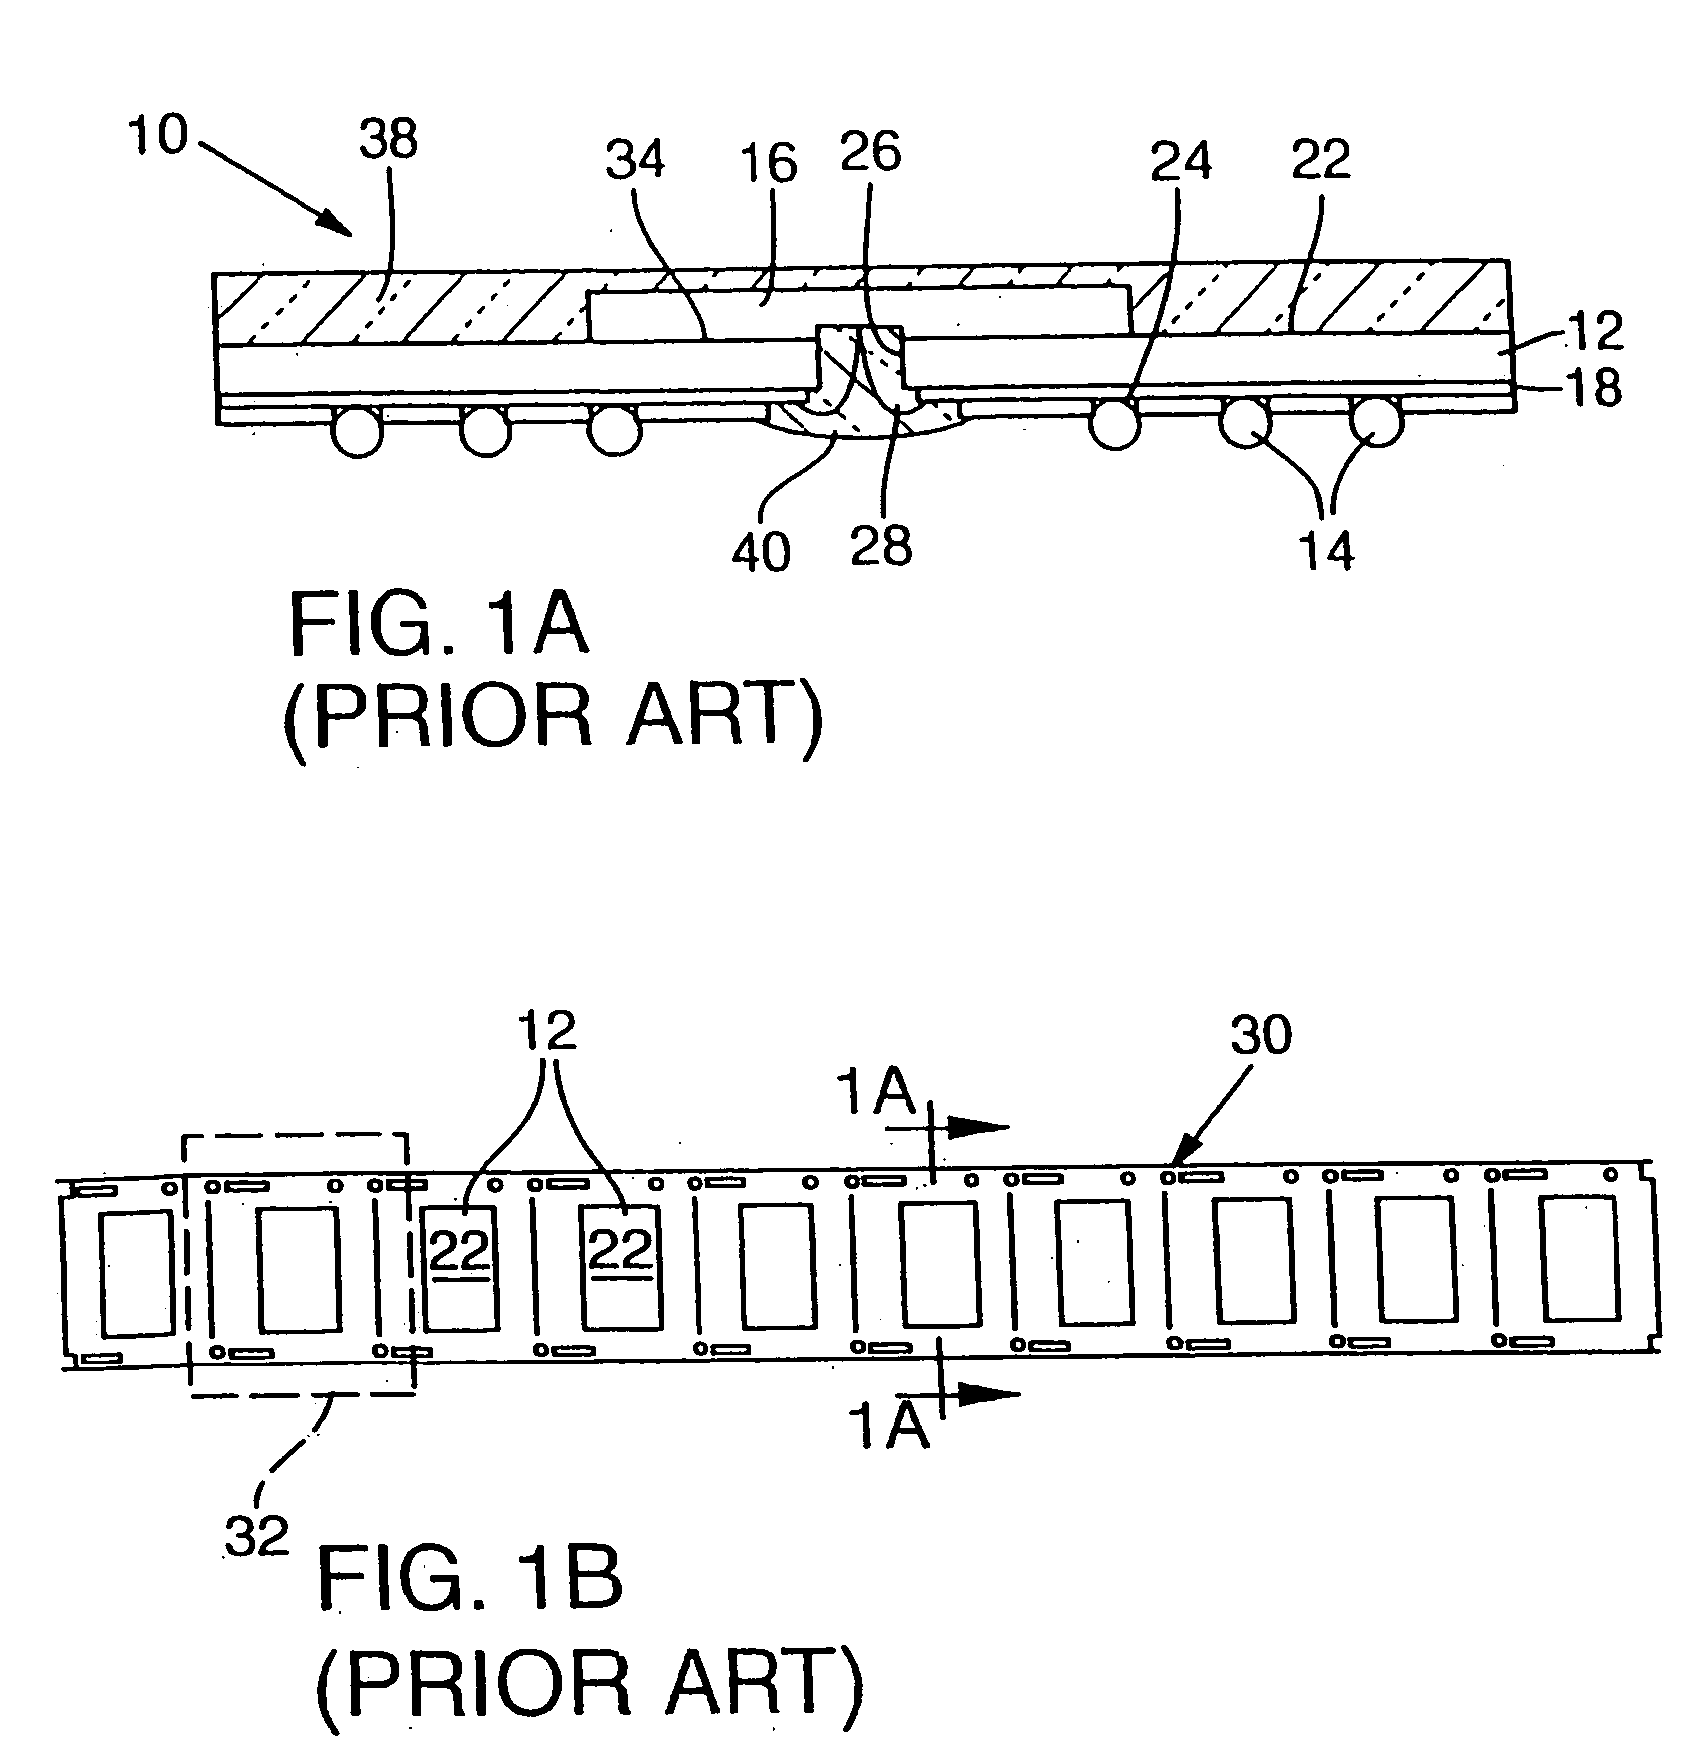 Apparatus and methods for coverlay removal and adhesive application